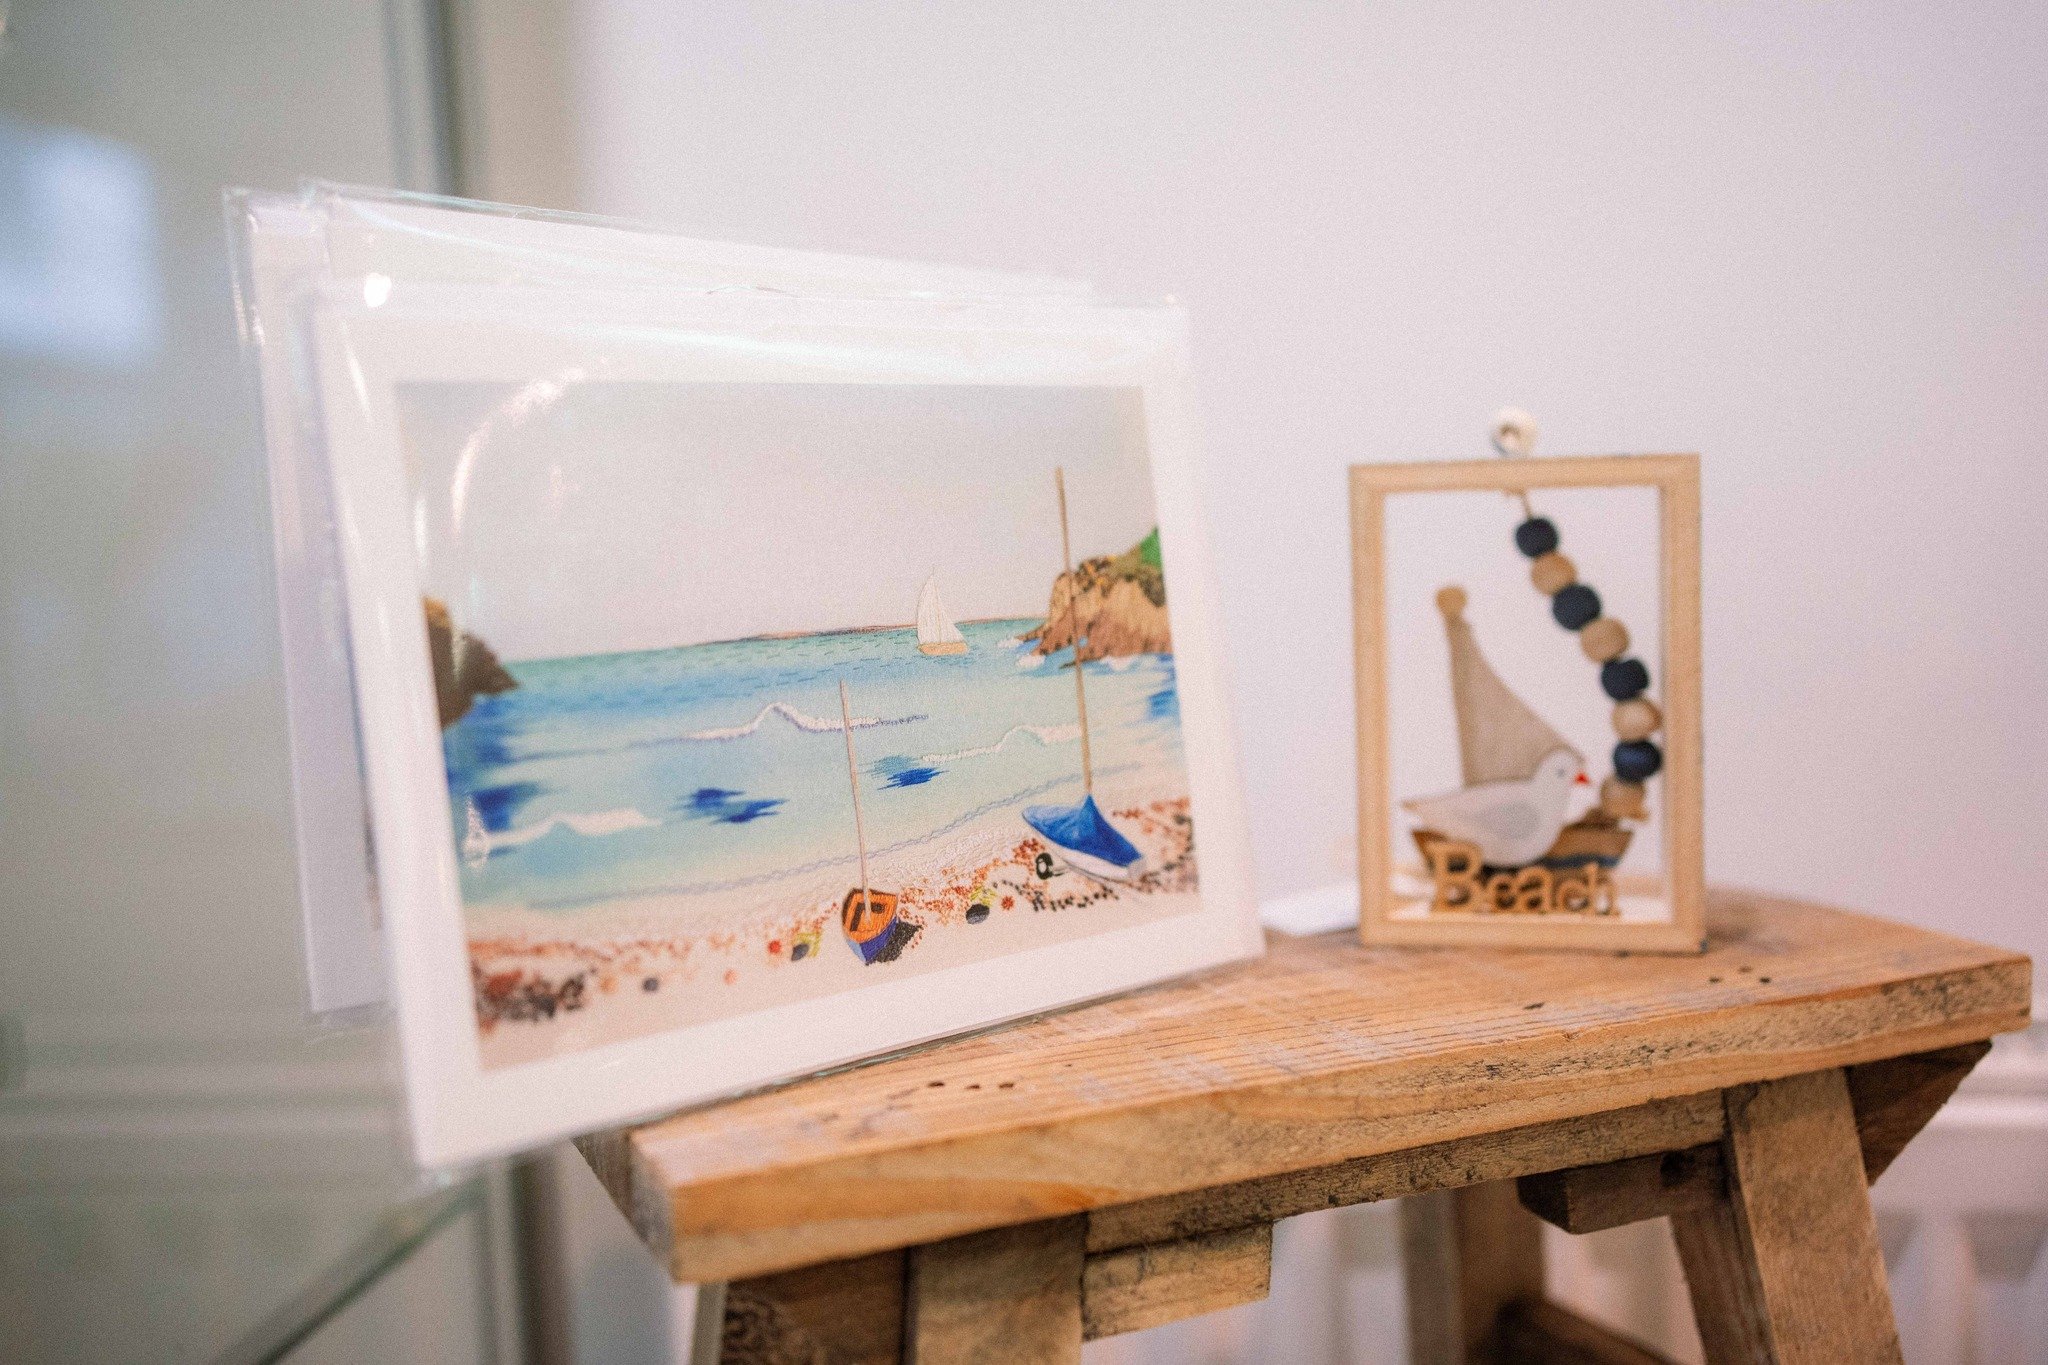 Love these beach-themed cards from Lucinda's art ❤️

These are prints of Lucinda's original hand-embroidered pieces and would make great greeting cards.

www.mhgallery.org/lucinda-thompson

#supportlocal #supportsmallbusiness #llanelli #carmarthenshi